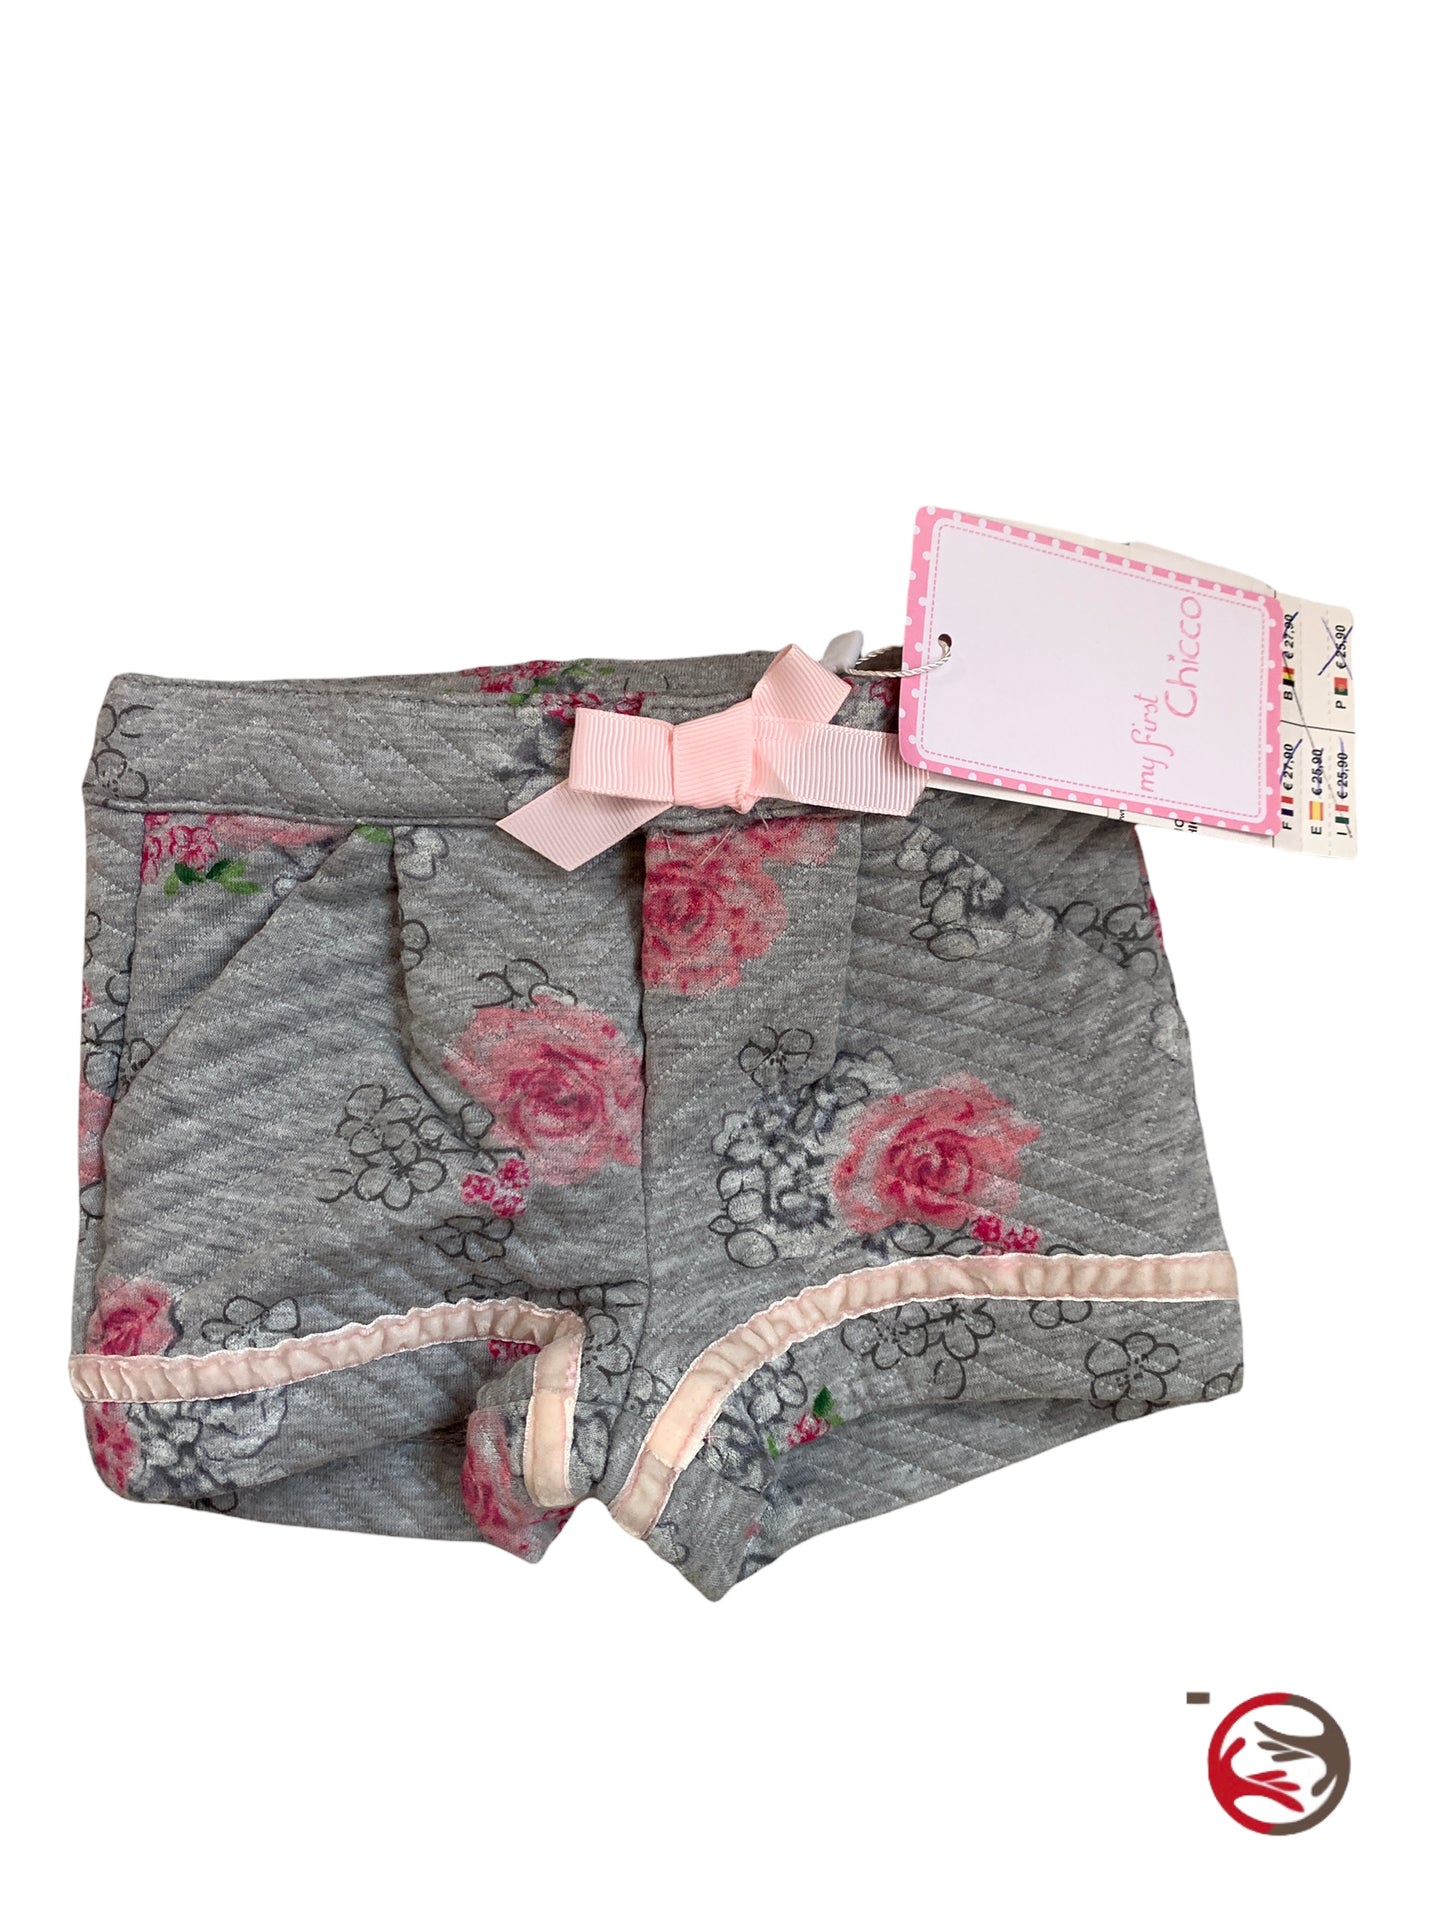 Chicco new flower shorts for girls 3-6 months